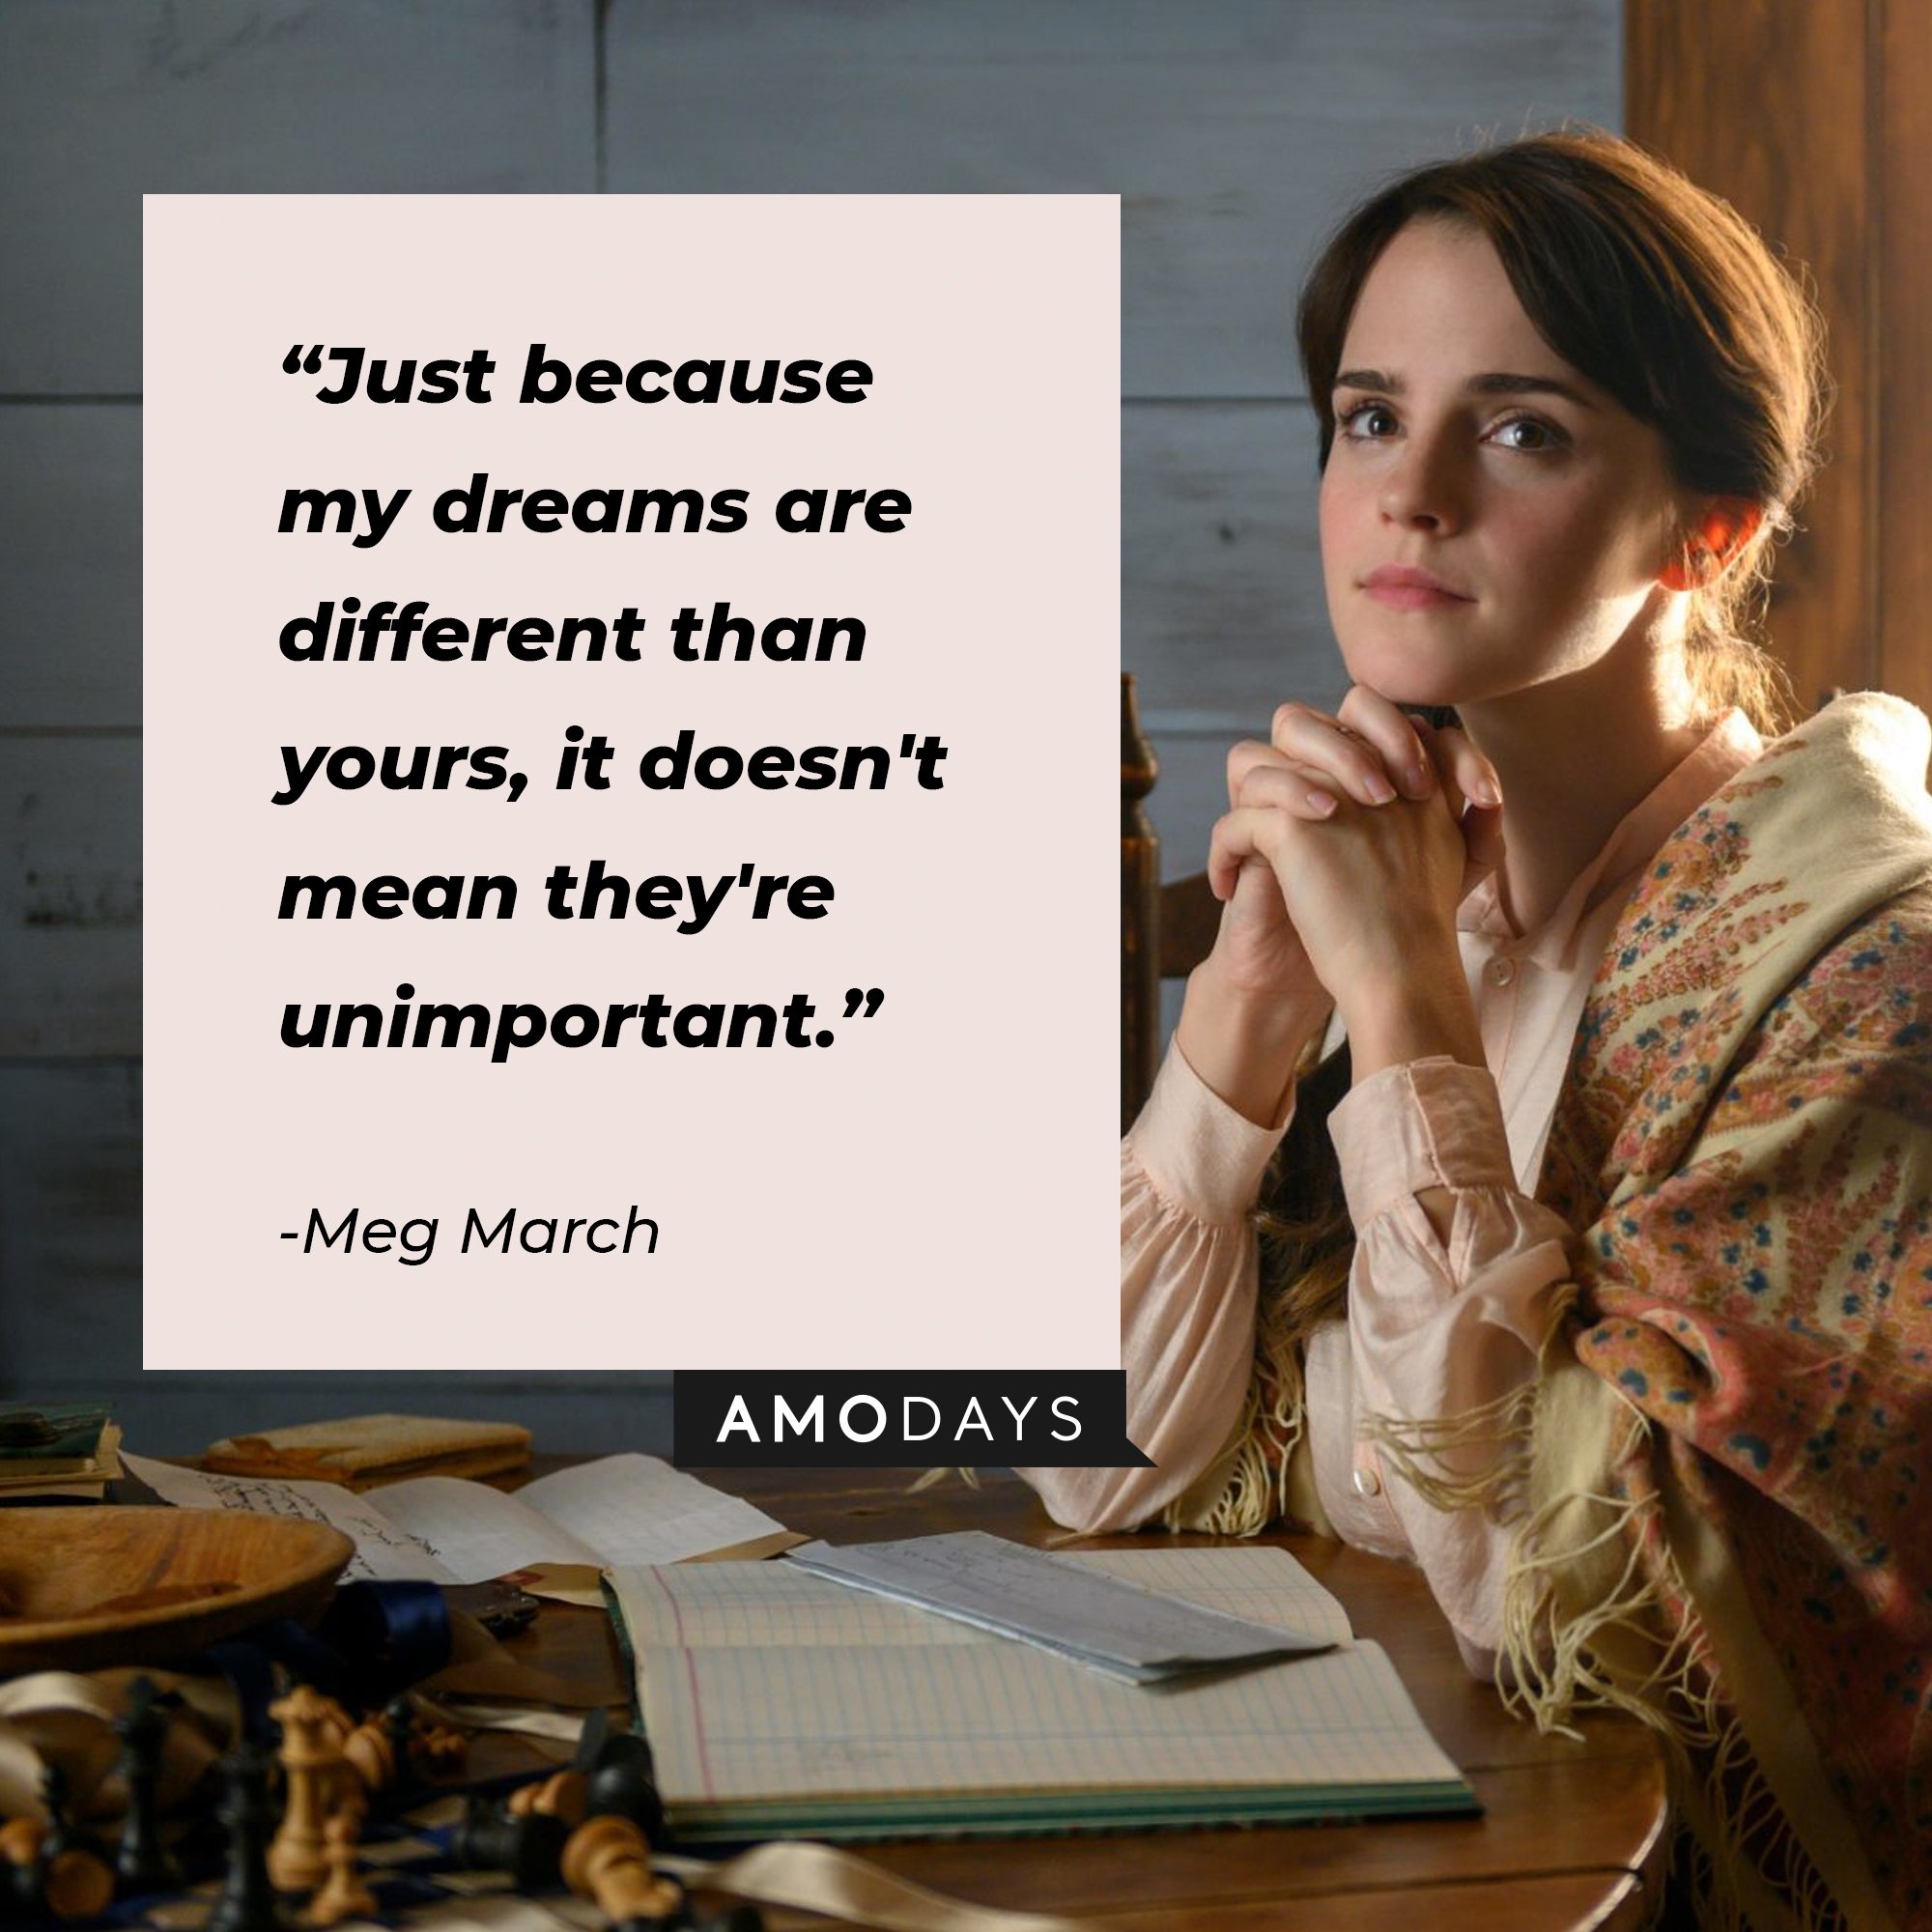 Meg March’s quote: “Just because my dreams are different than yours, it doesn’t mean they’re unimportant.” | Image: AmoDays